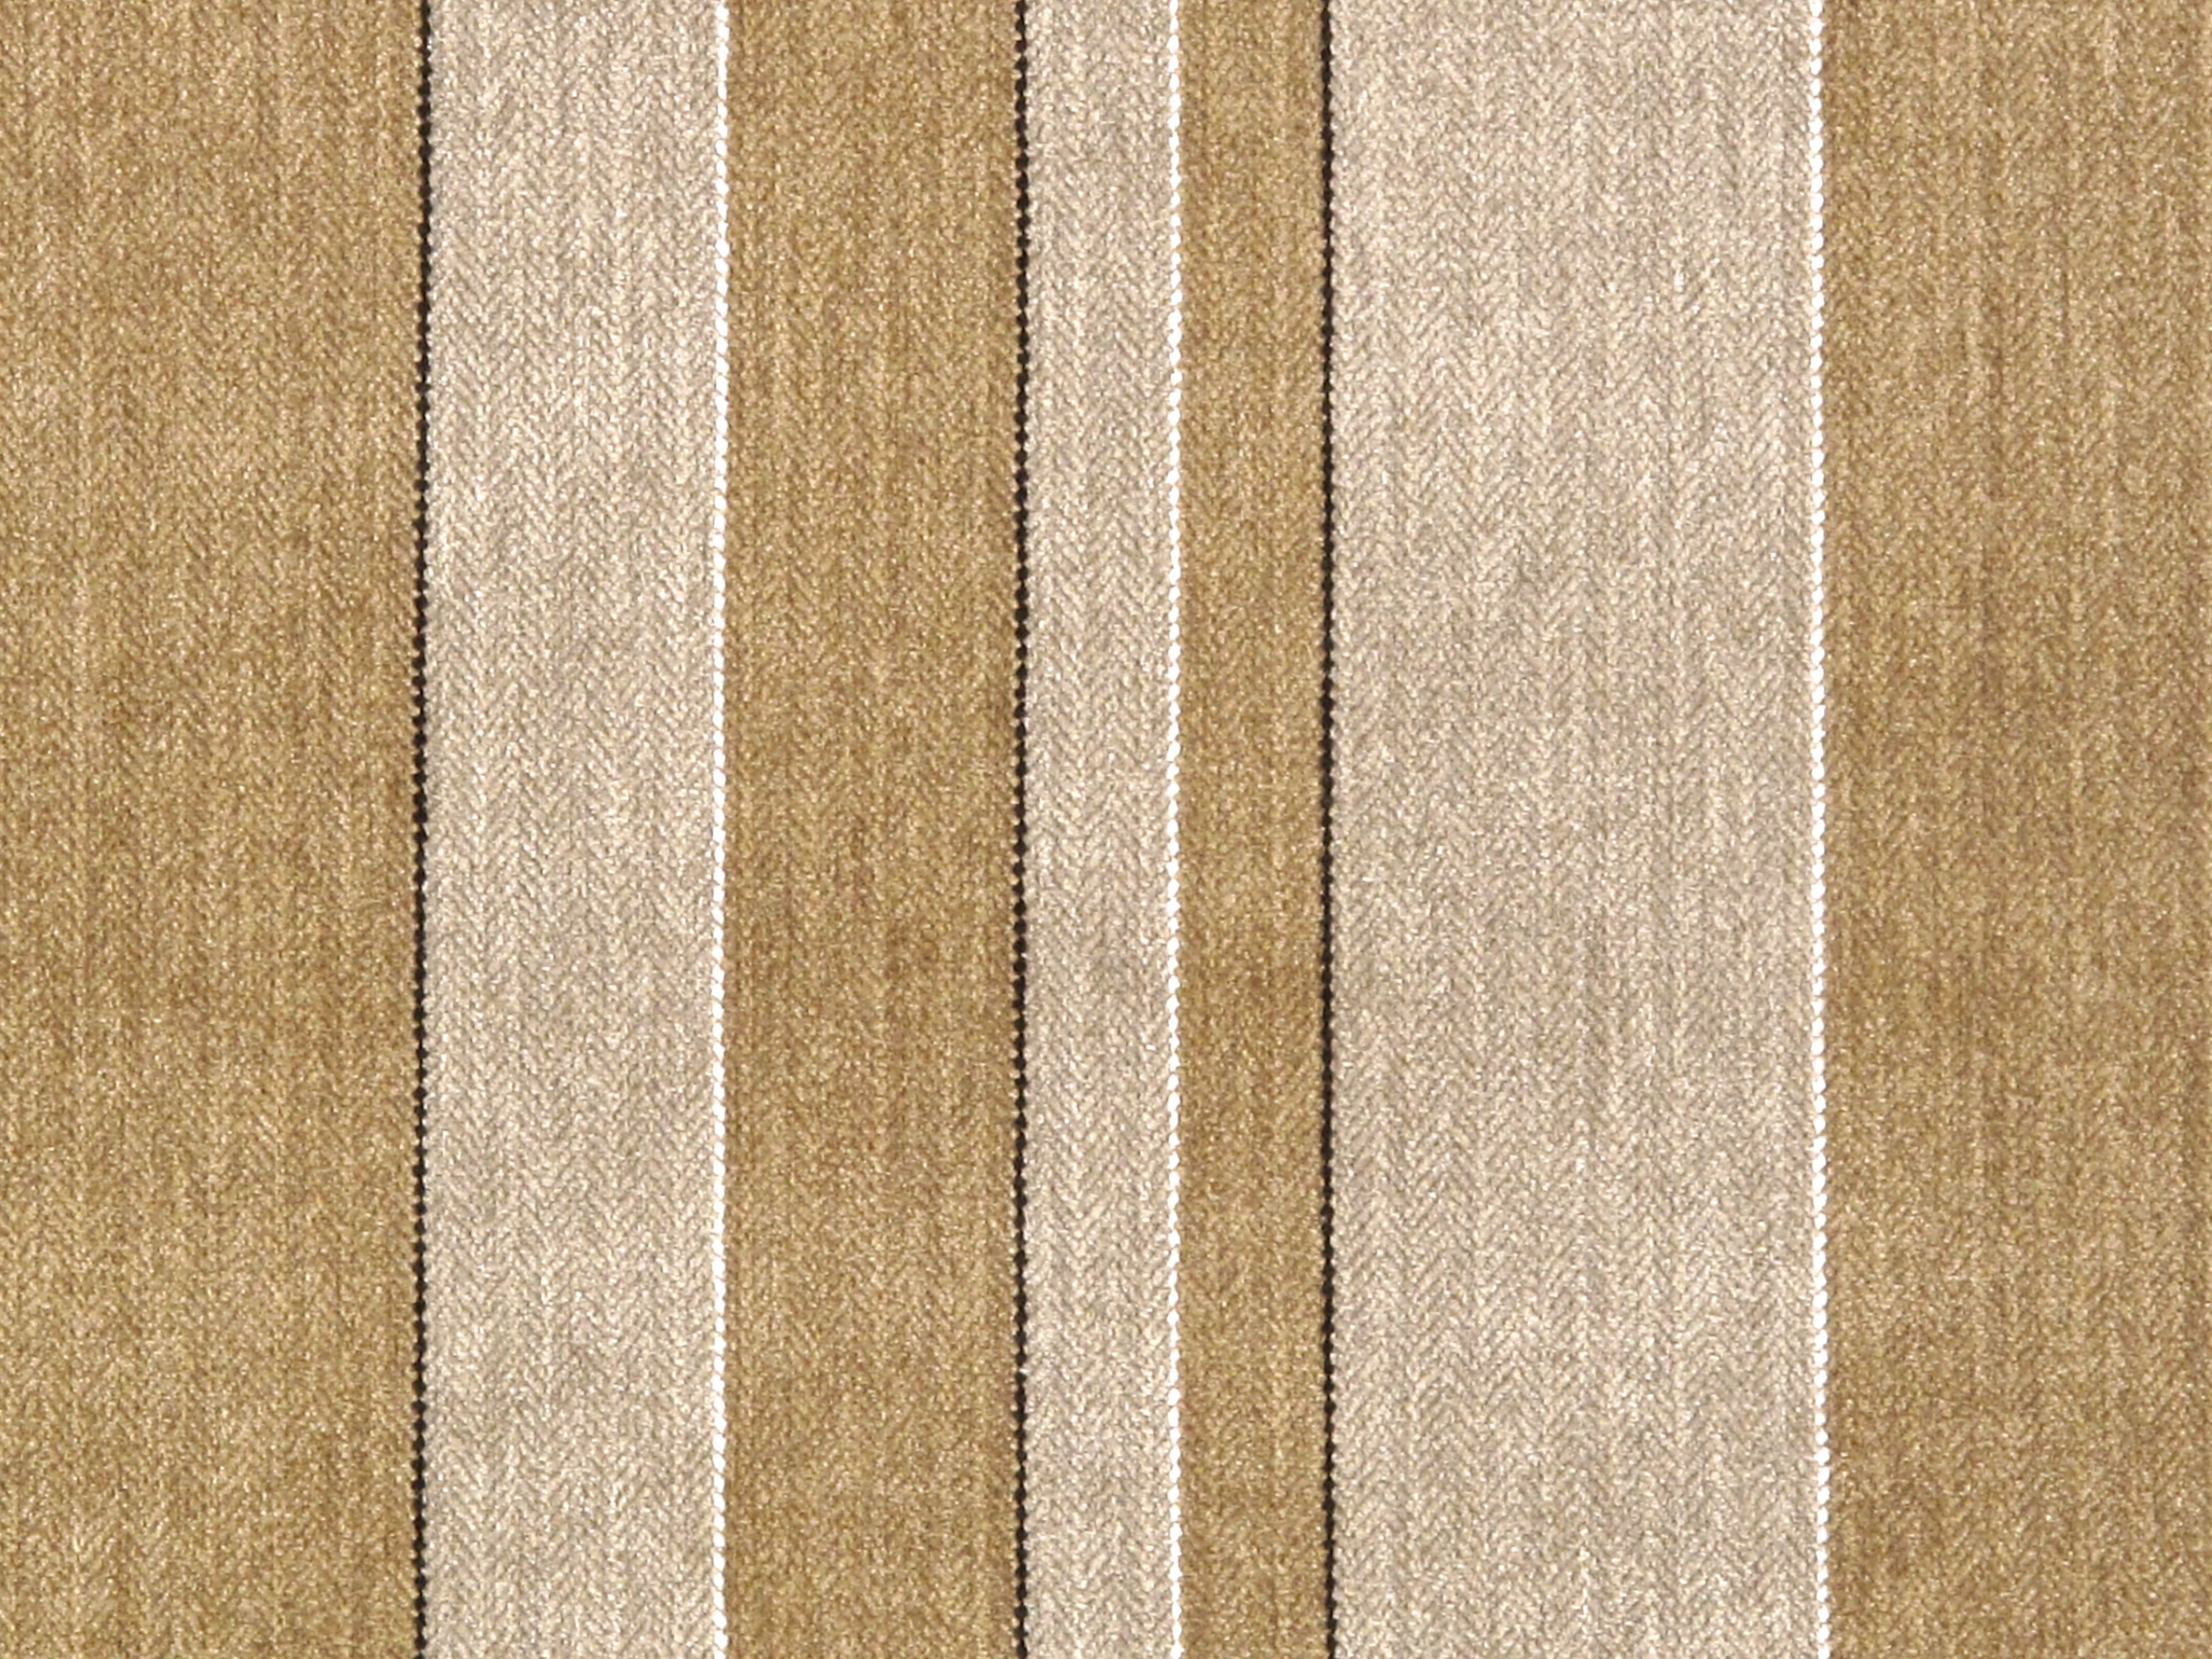 Pedra fabric in cashew/cedar color - pattern number LU 00028187 - by Scalamandre in the Old World Weavers collection